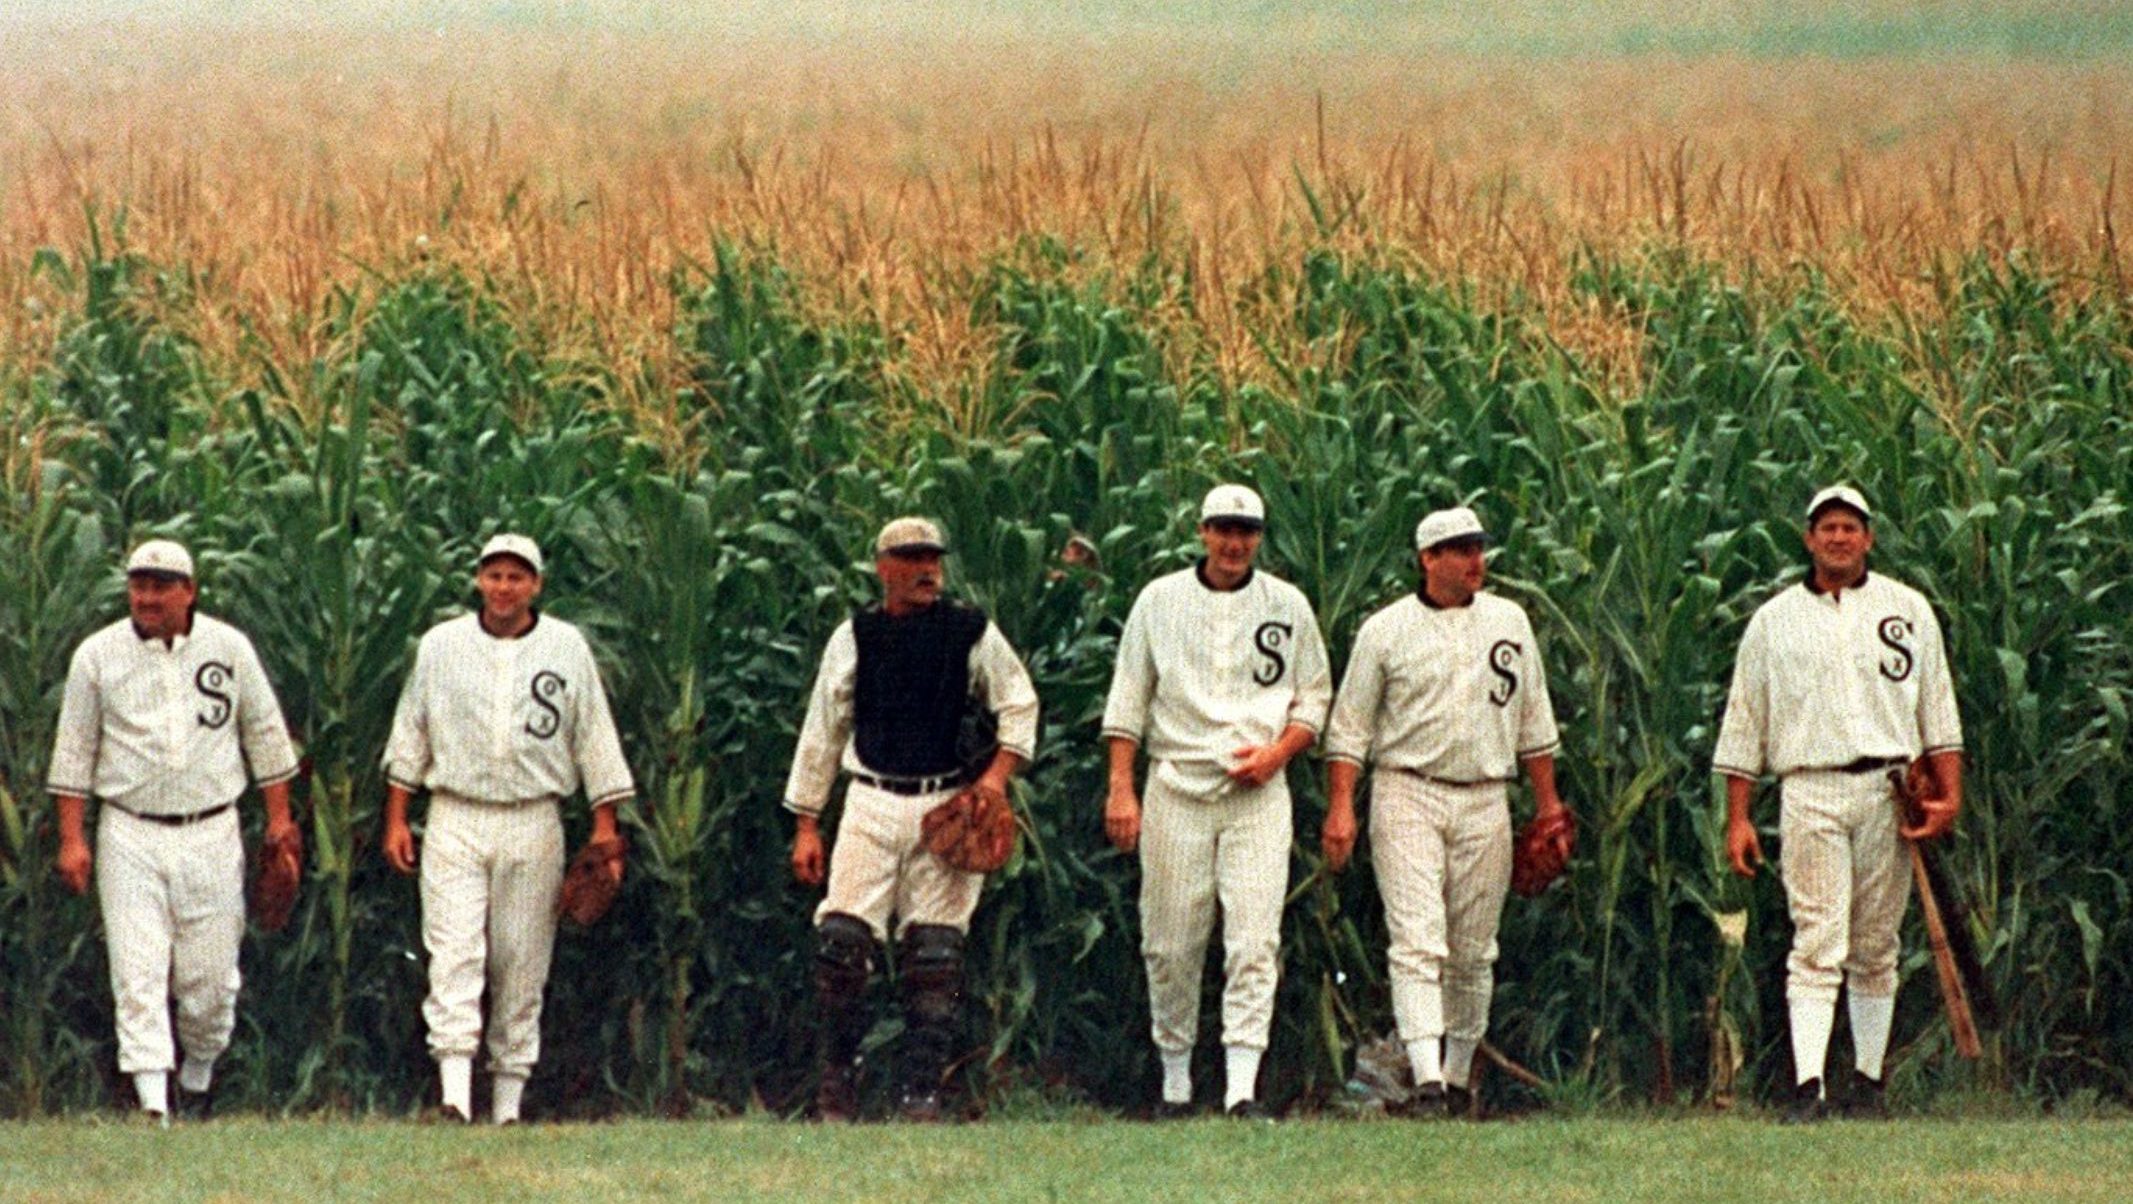 Top 10 baseball movies, with 'Field of Dreams' game on the mind